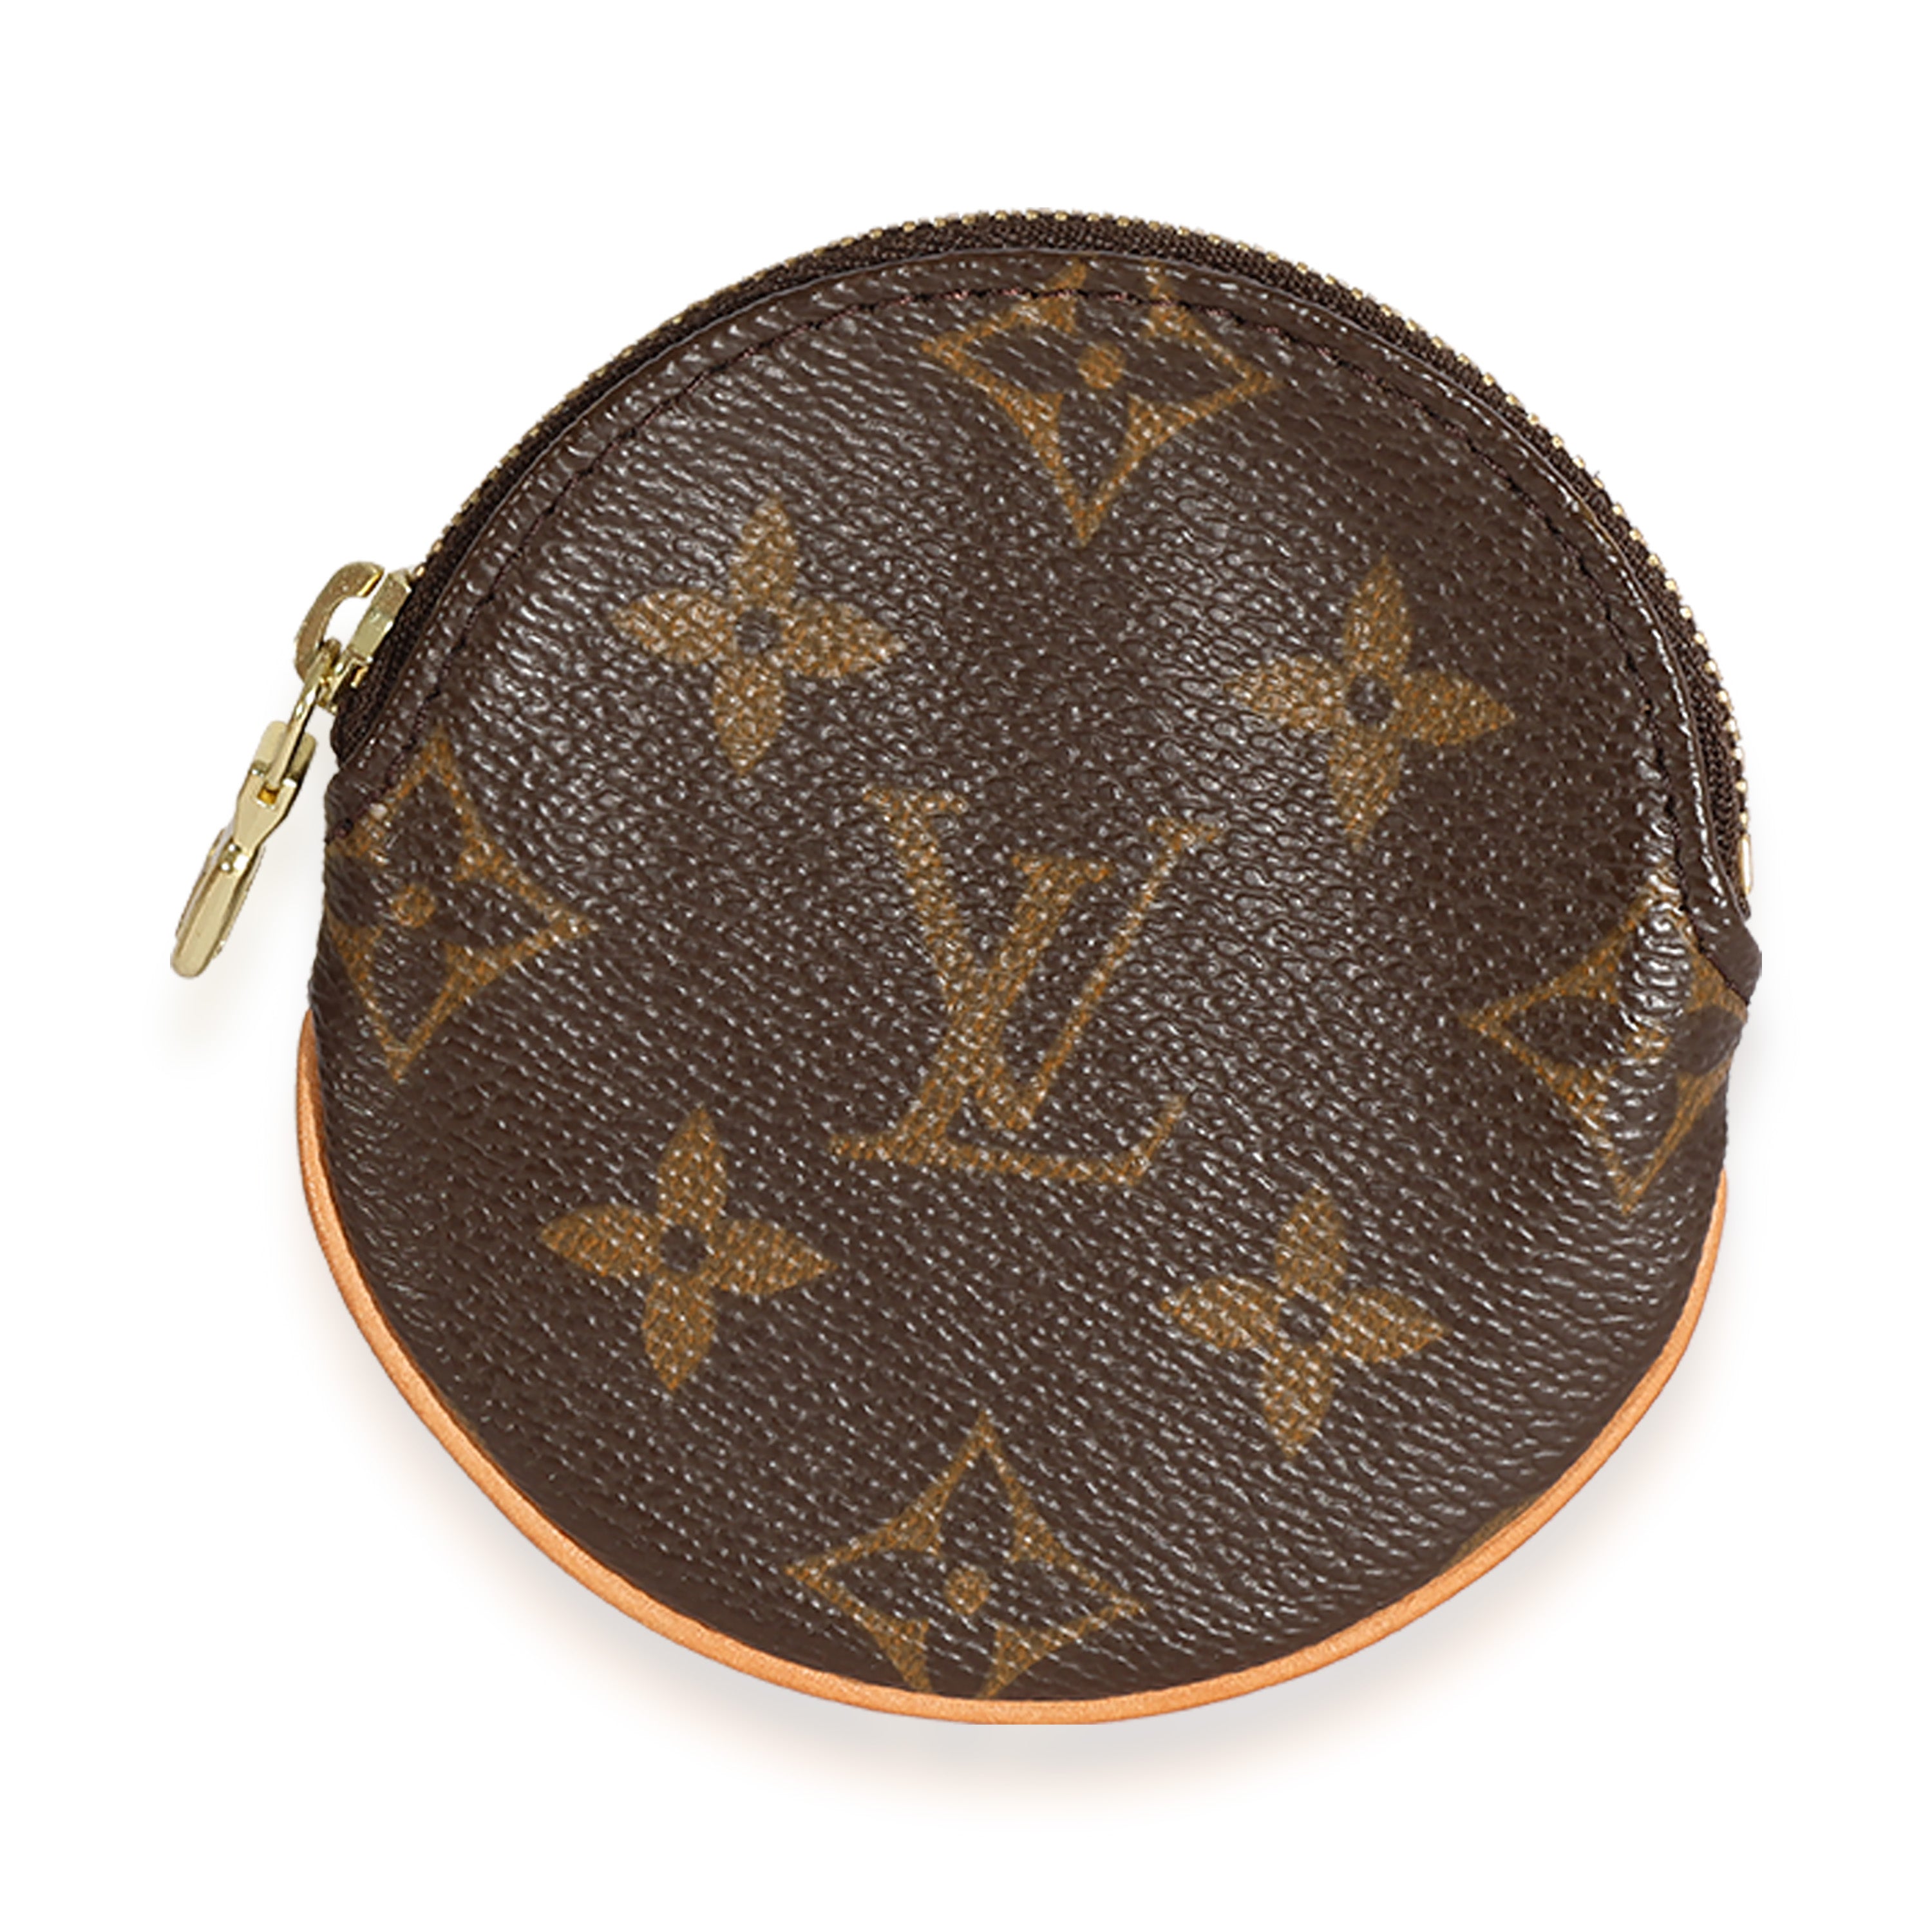 0587 NUDE PEBBLE LEATHER ROUND COIN/ACCESSORY PURSE [0587 NUDE RND LEATHER  COIN PURSE] : MF Handbags